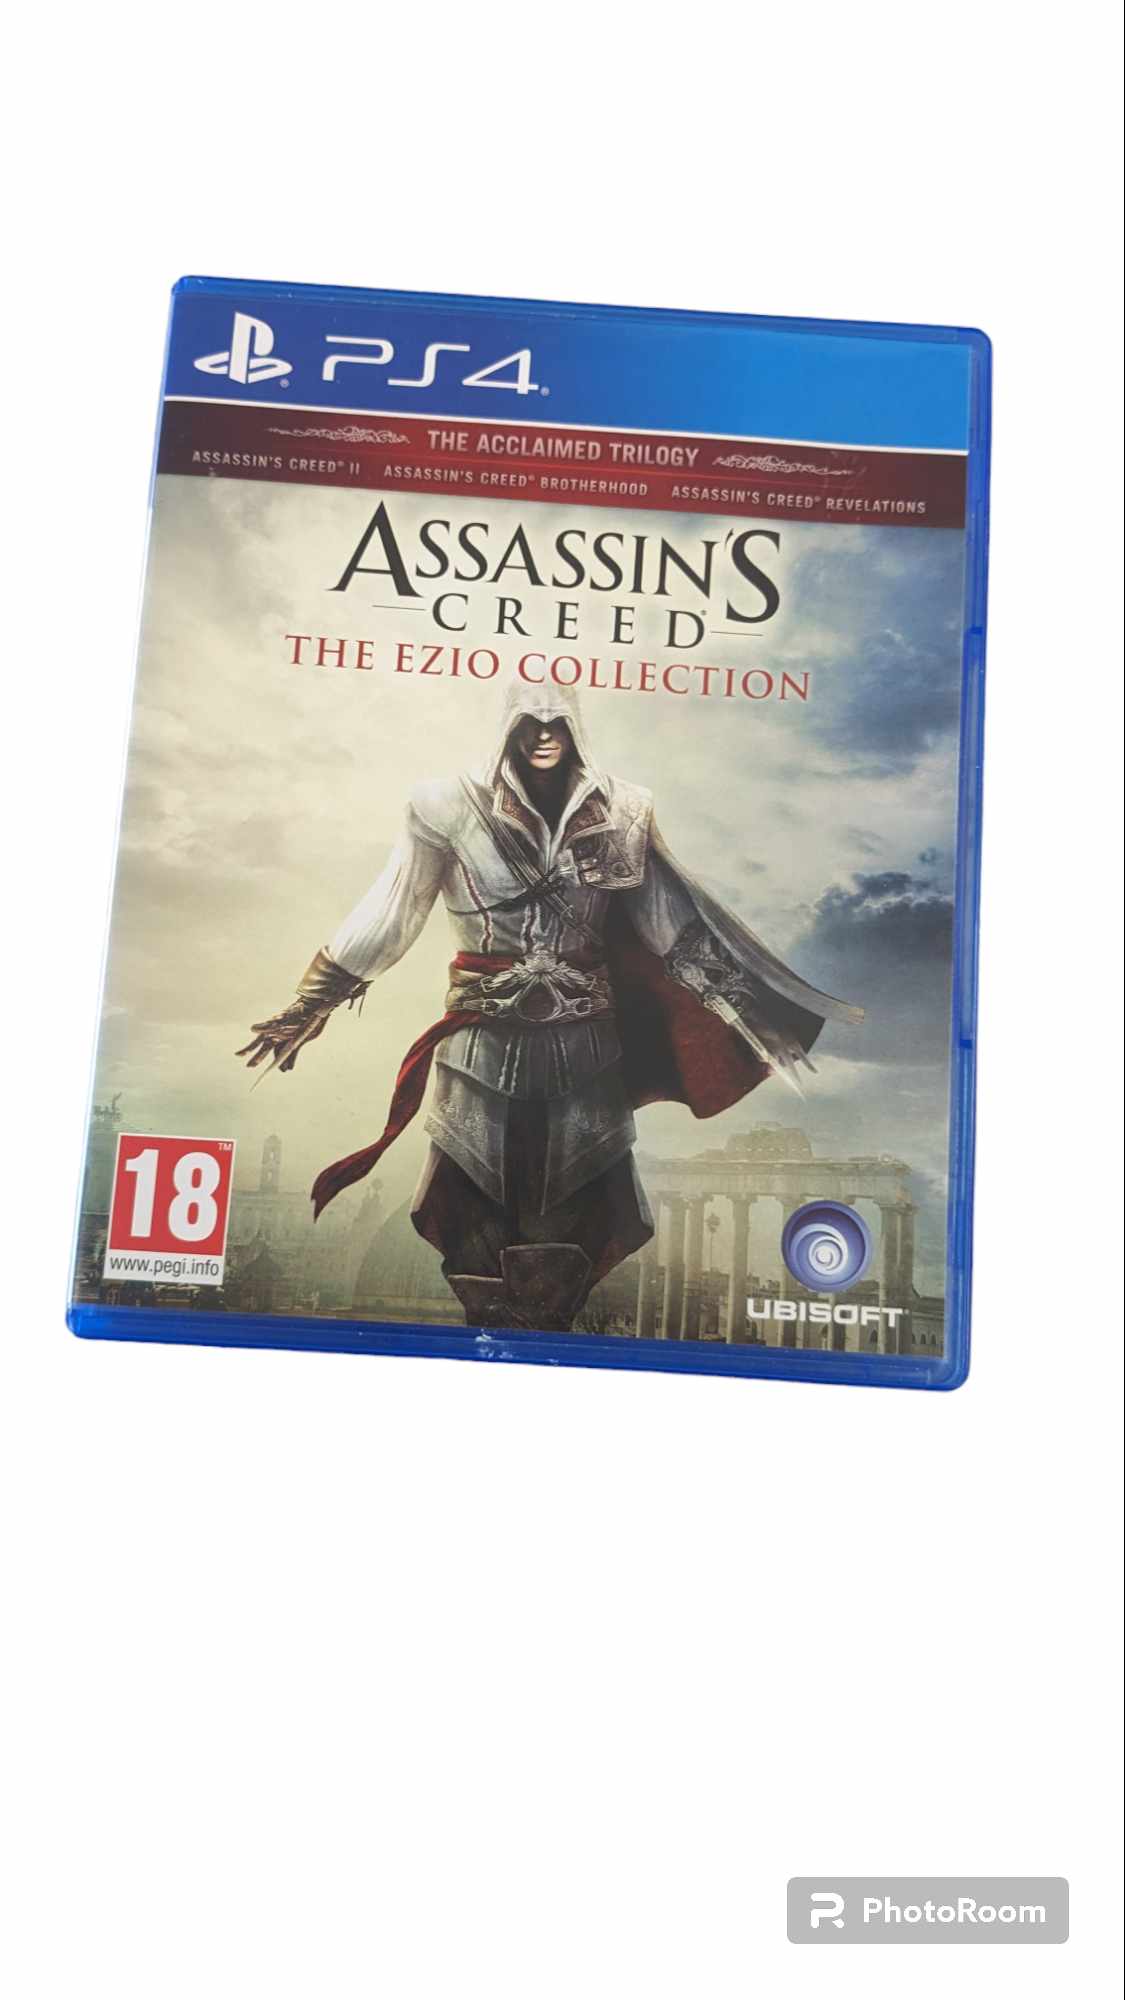 PS4 Game Assassins Creed Ezio Collection